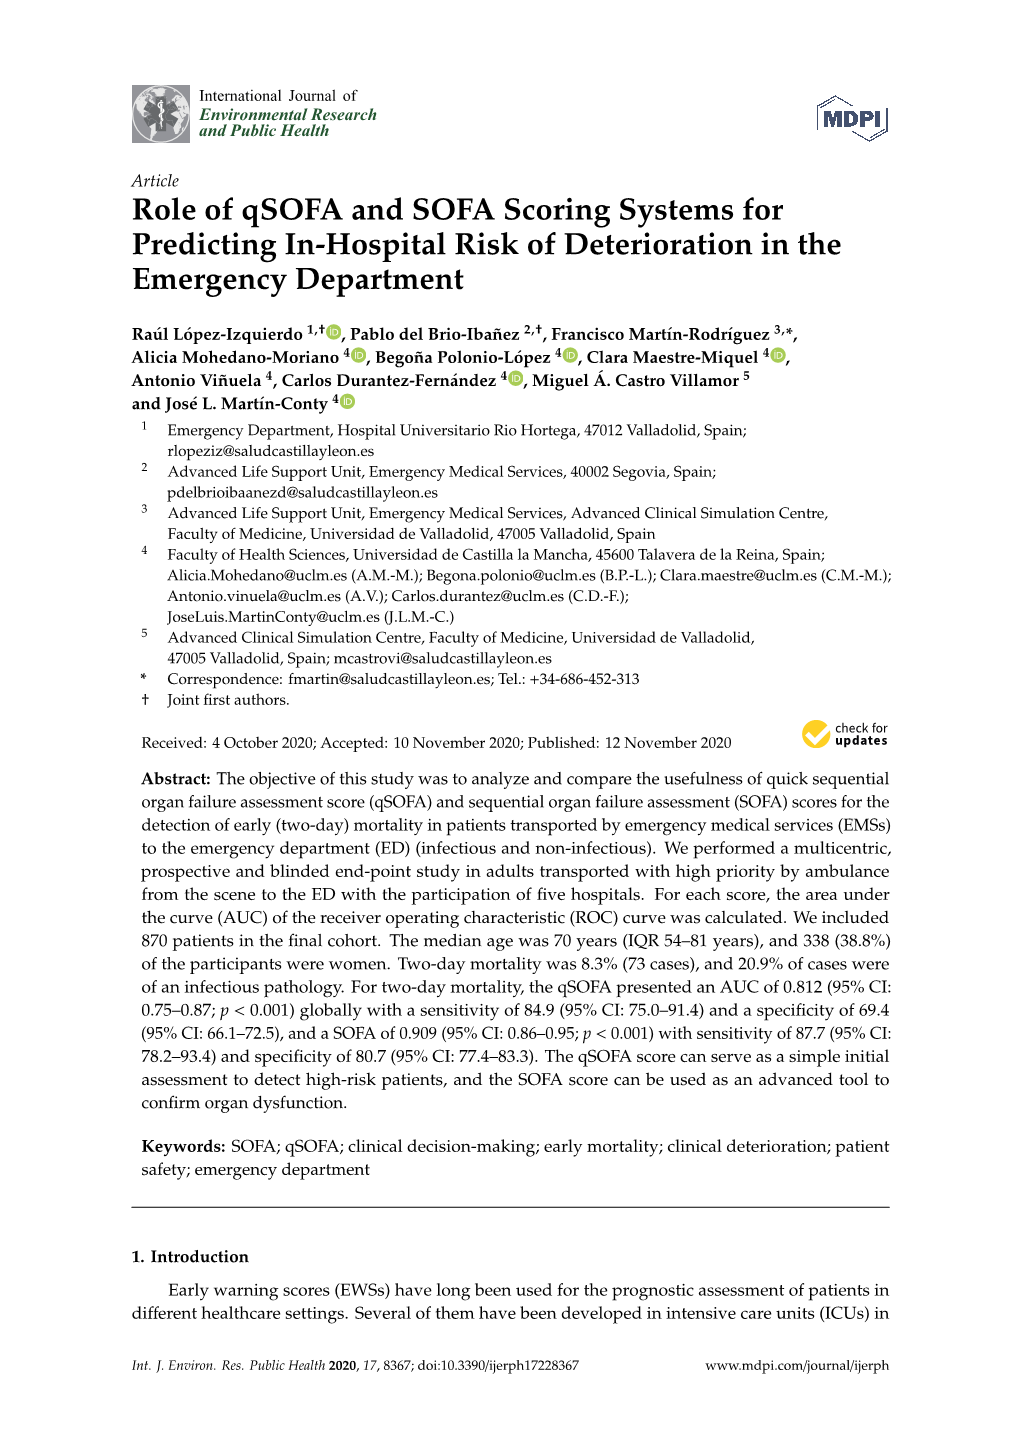 Role of Qsofa and SOFA Scoring Systems for Predicting In-Hospital Risk of Deterioration in the Emergency Department